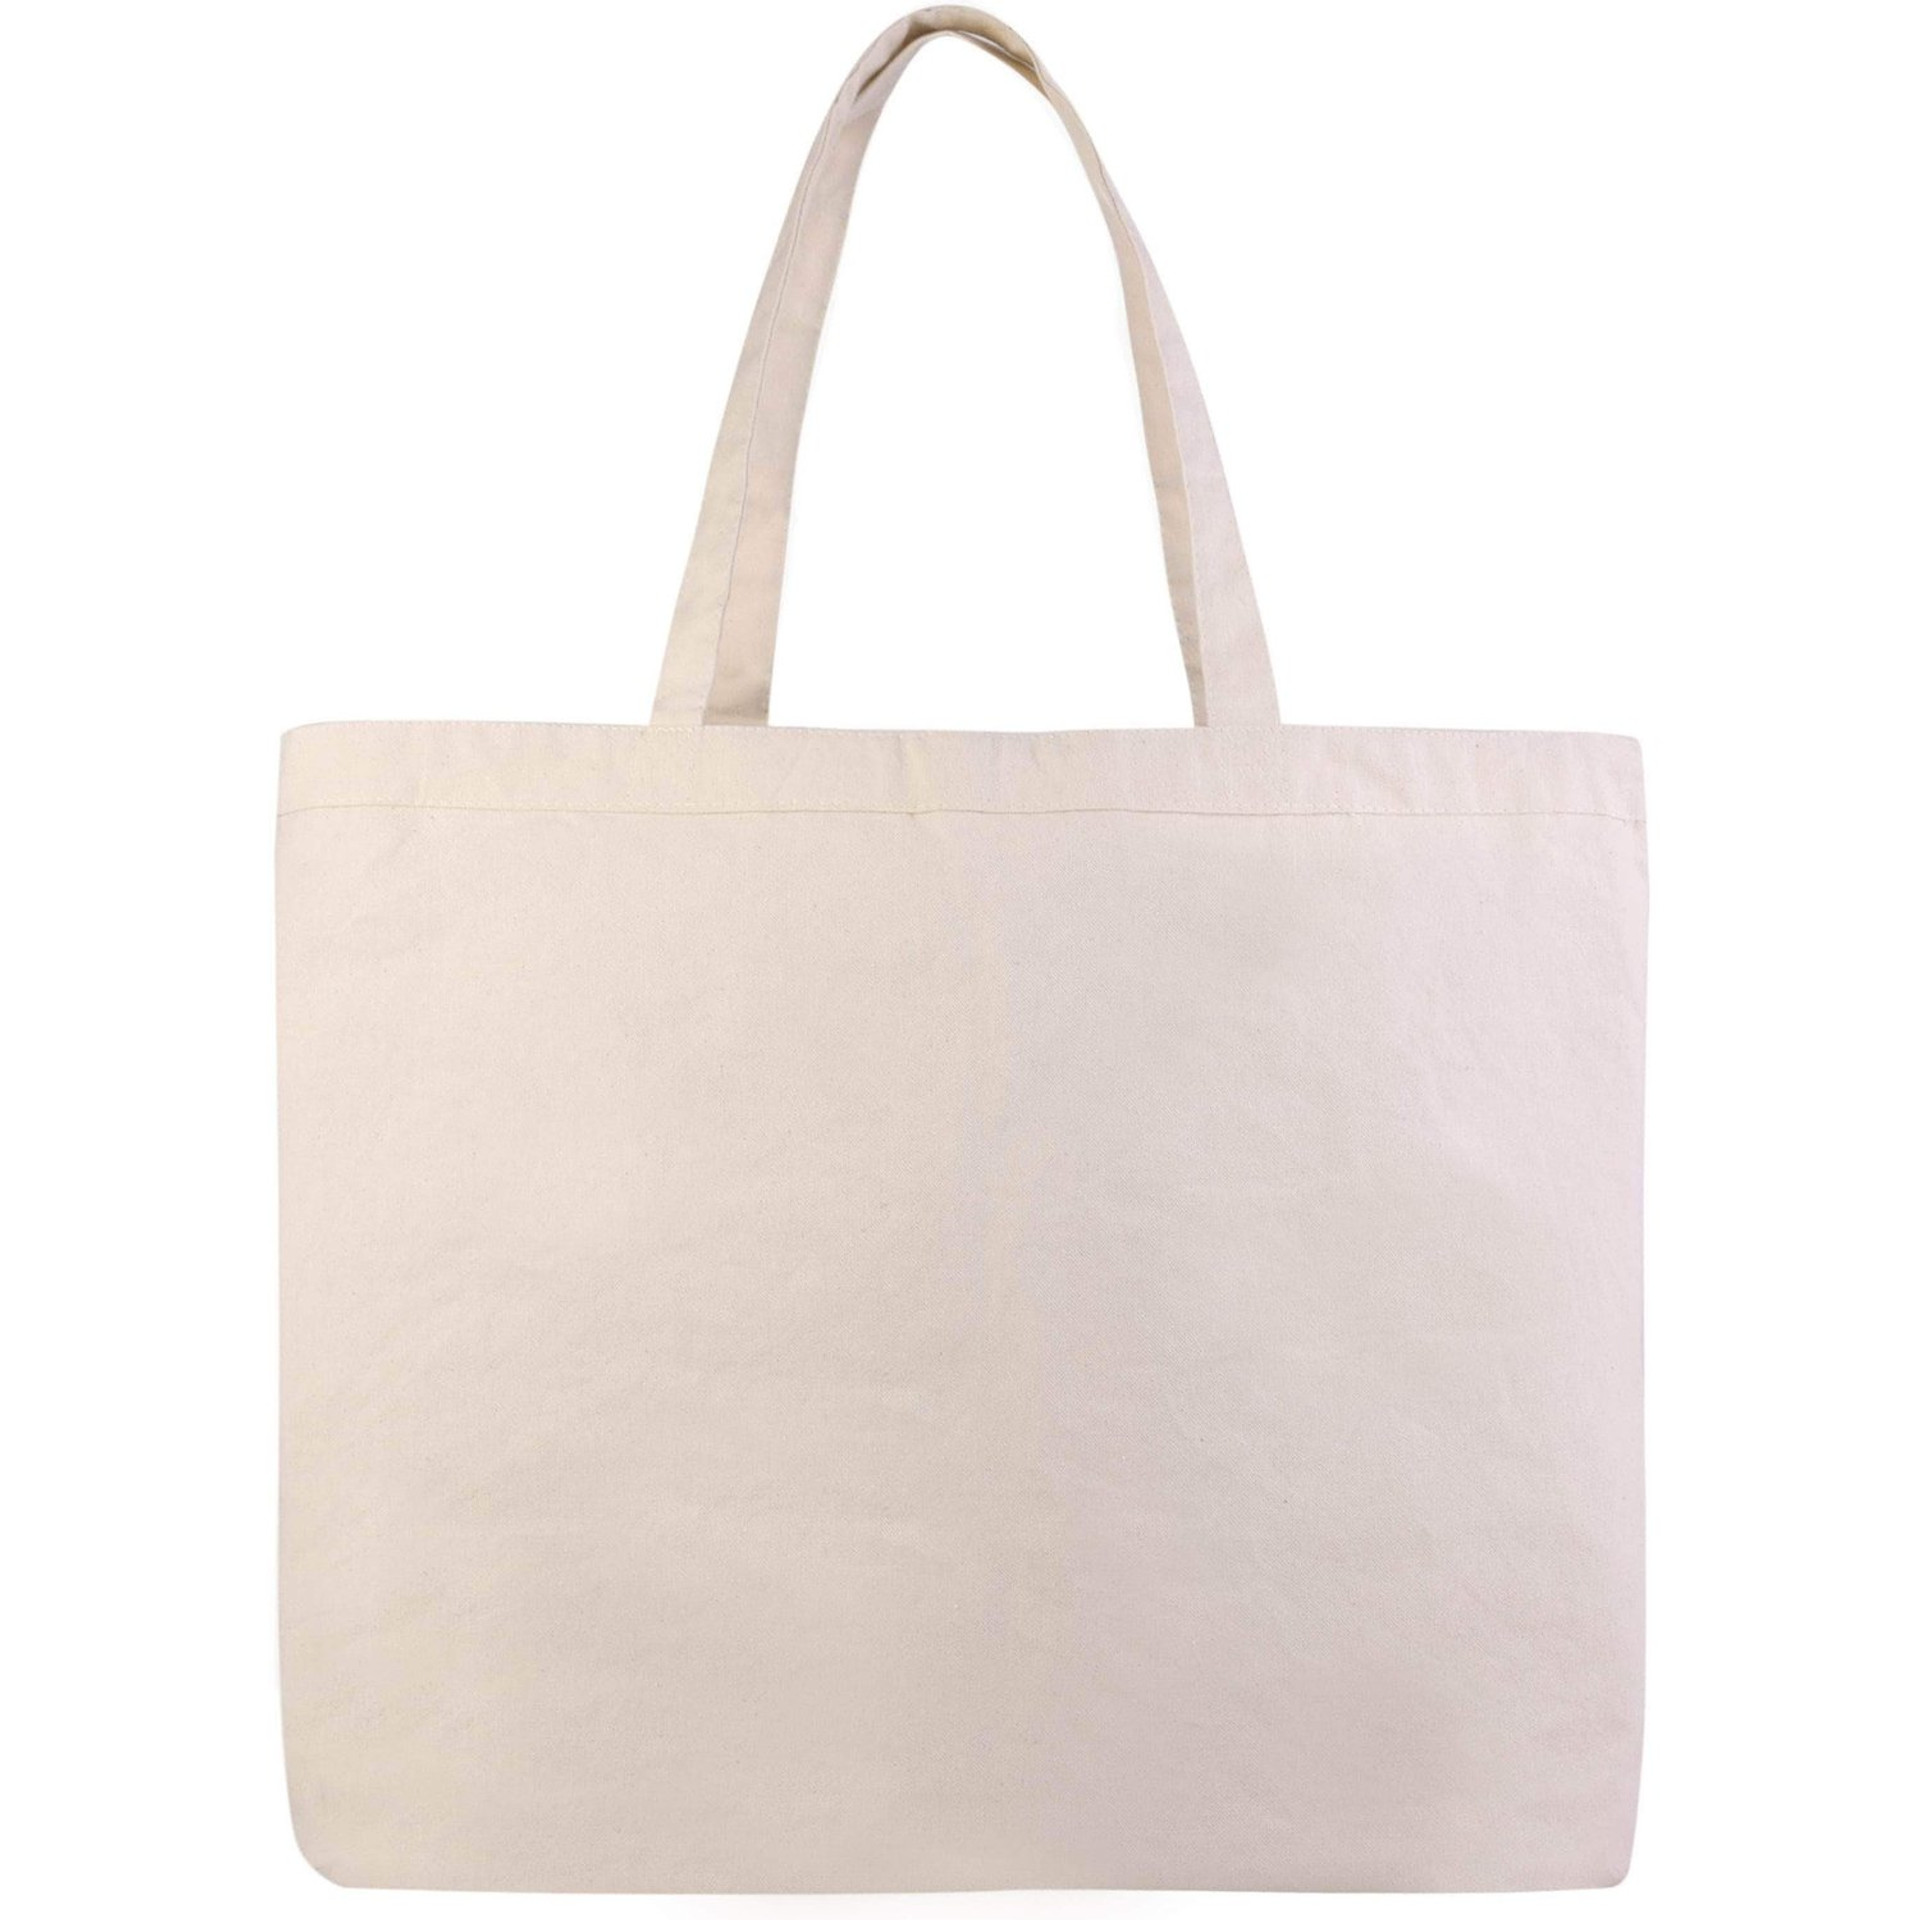 Extra Large Canvas Tote Bags Wholesale w/ Hook and Loop Closure